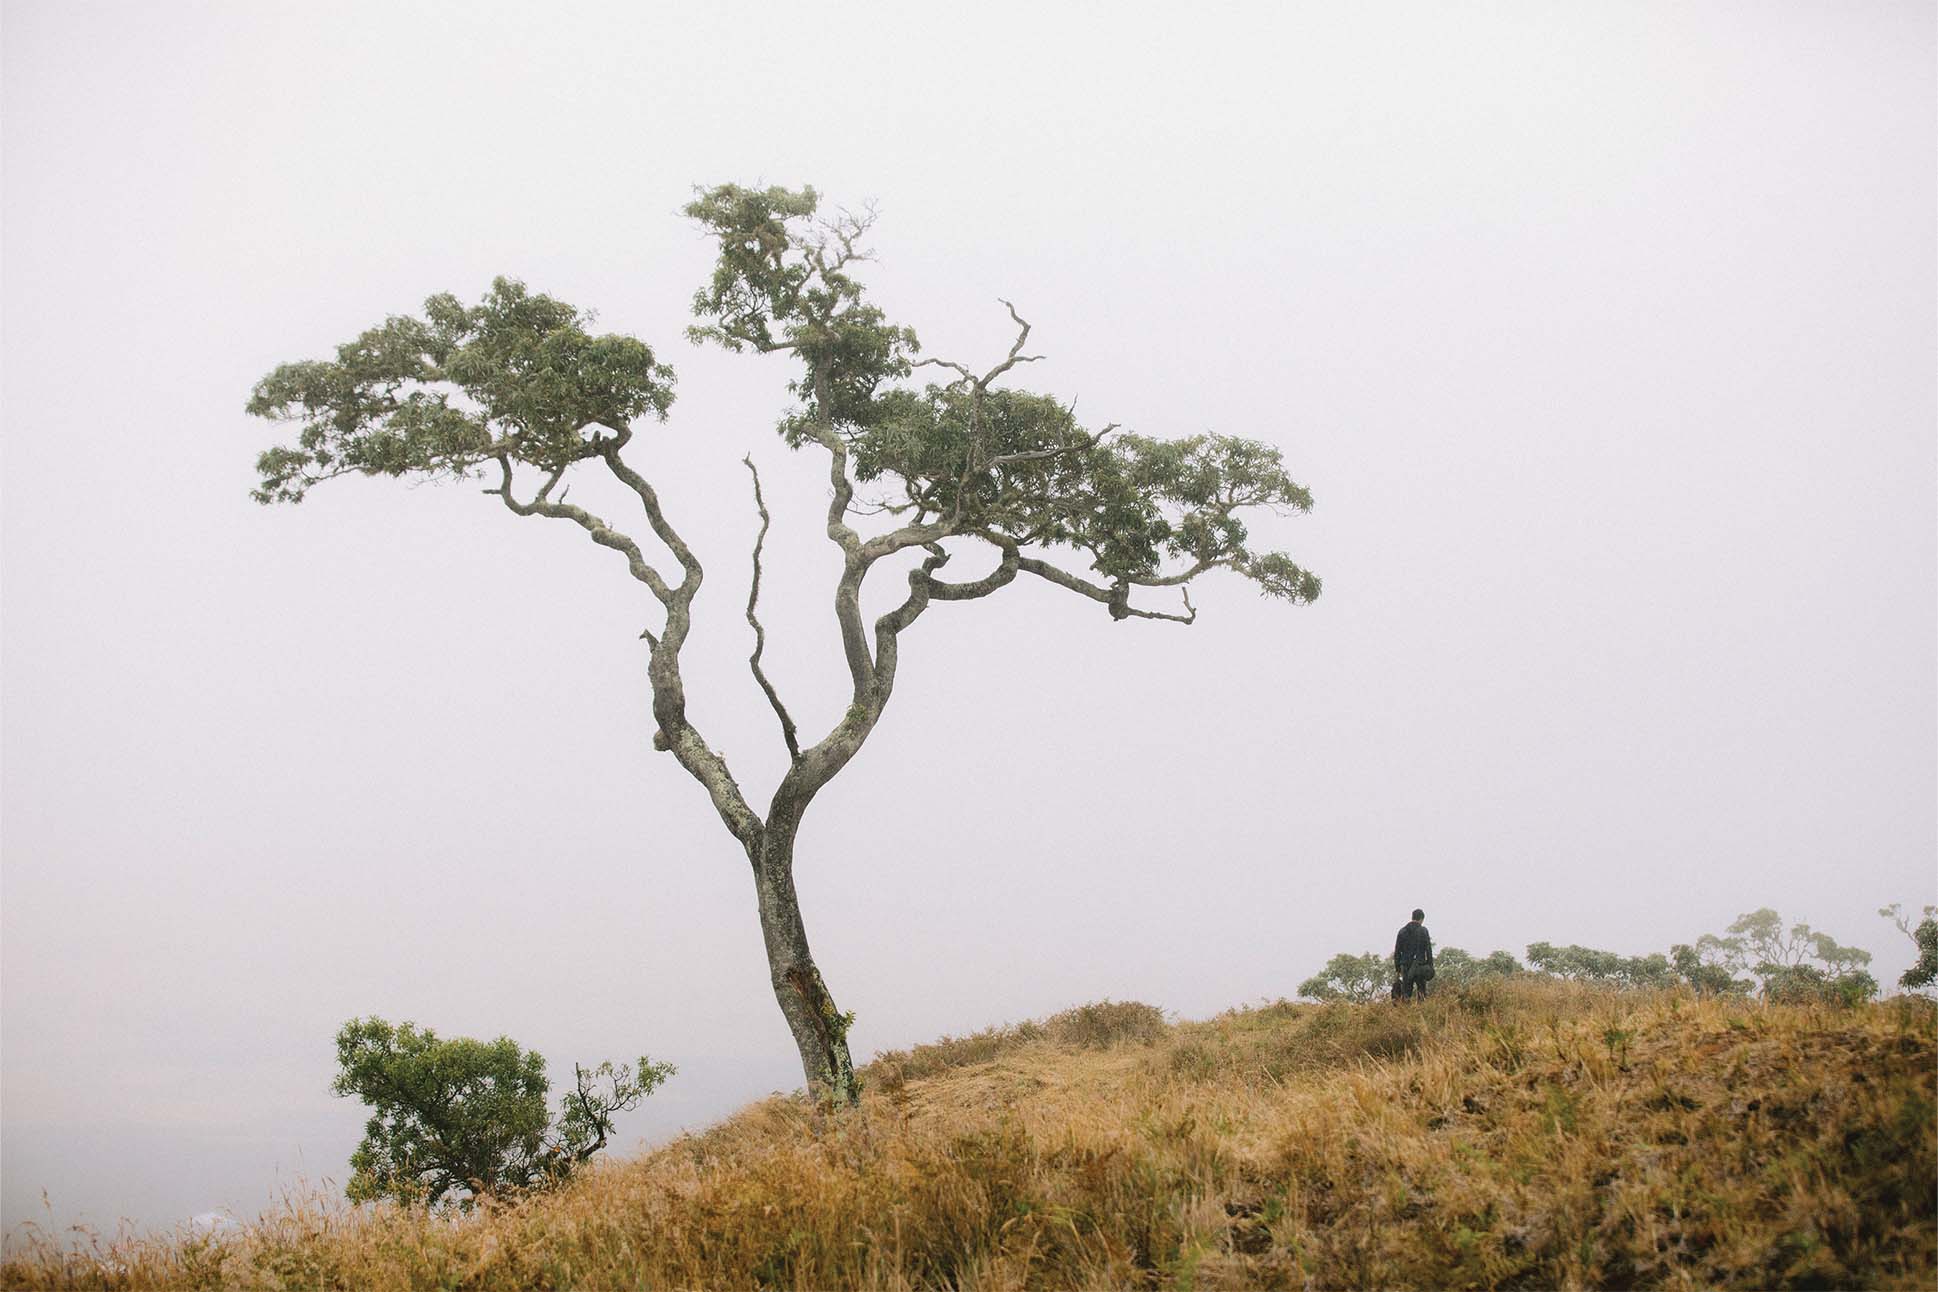 A solitary figure stands on a grassy hill beside a tall, twisted tree with a cloudy, white sky in the background.